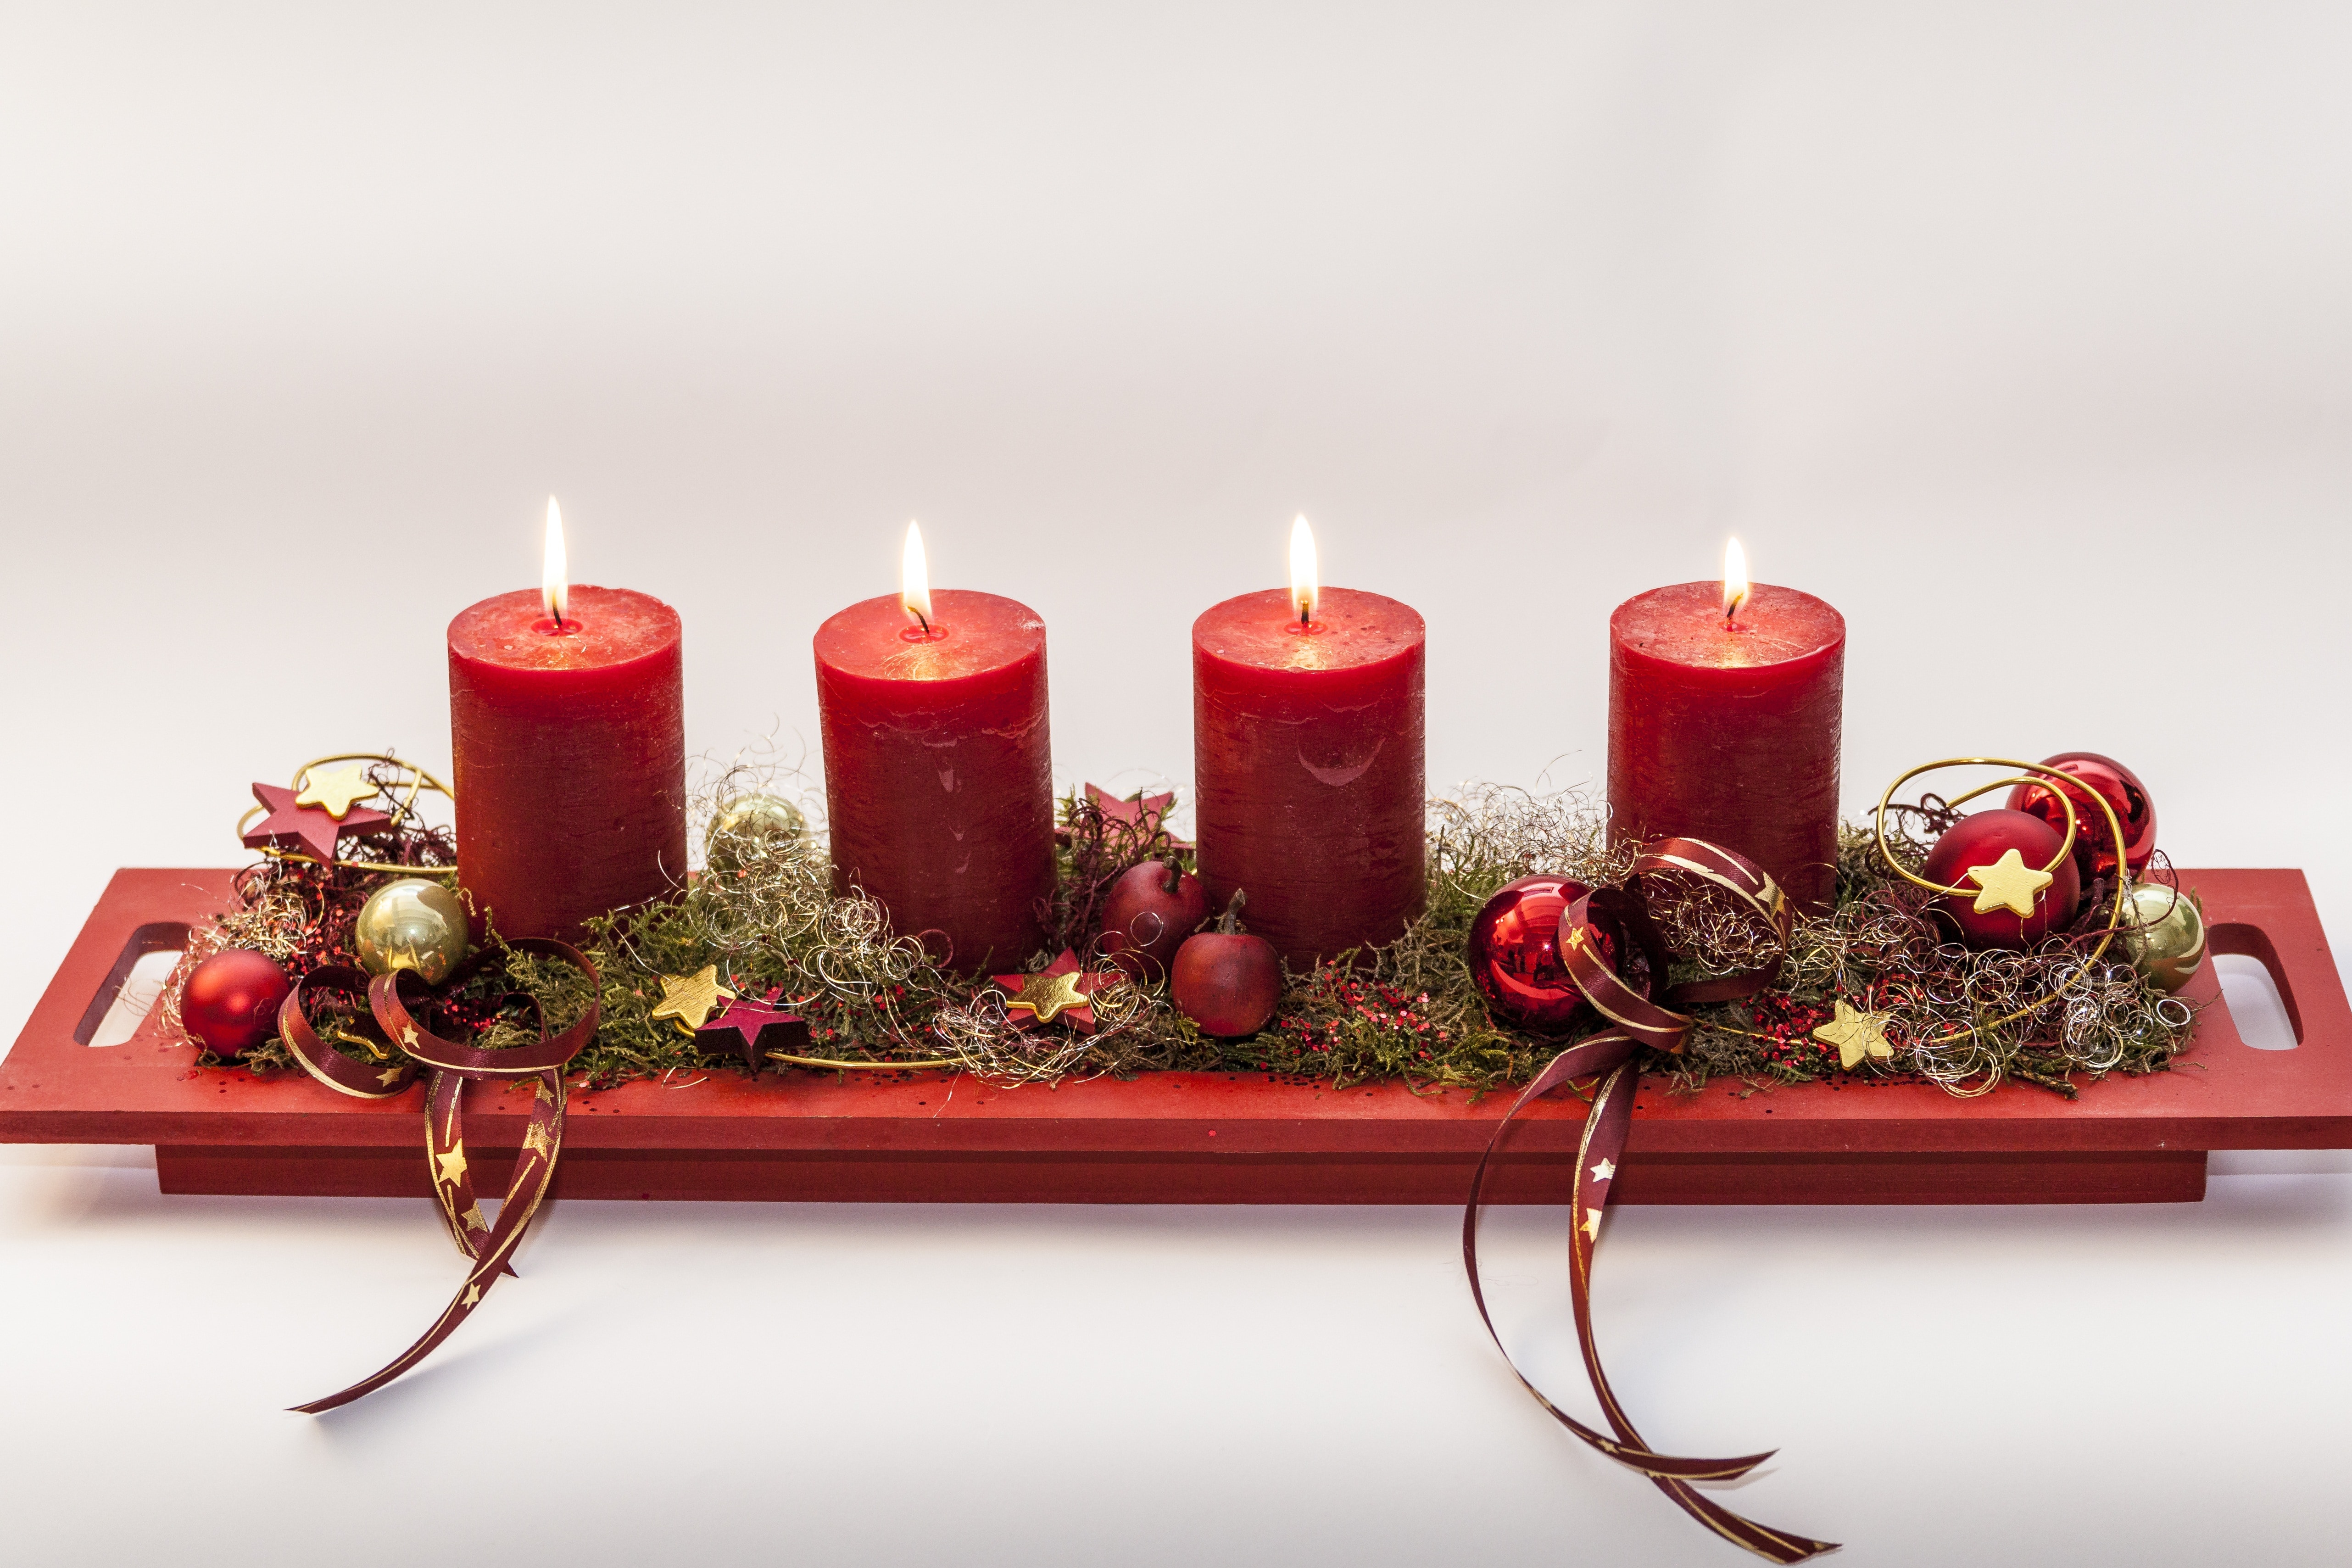 Fourth Candle, Advent, Before Christmas, candle, flame